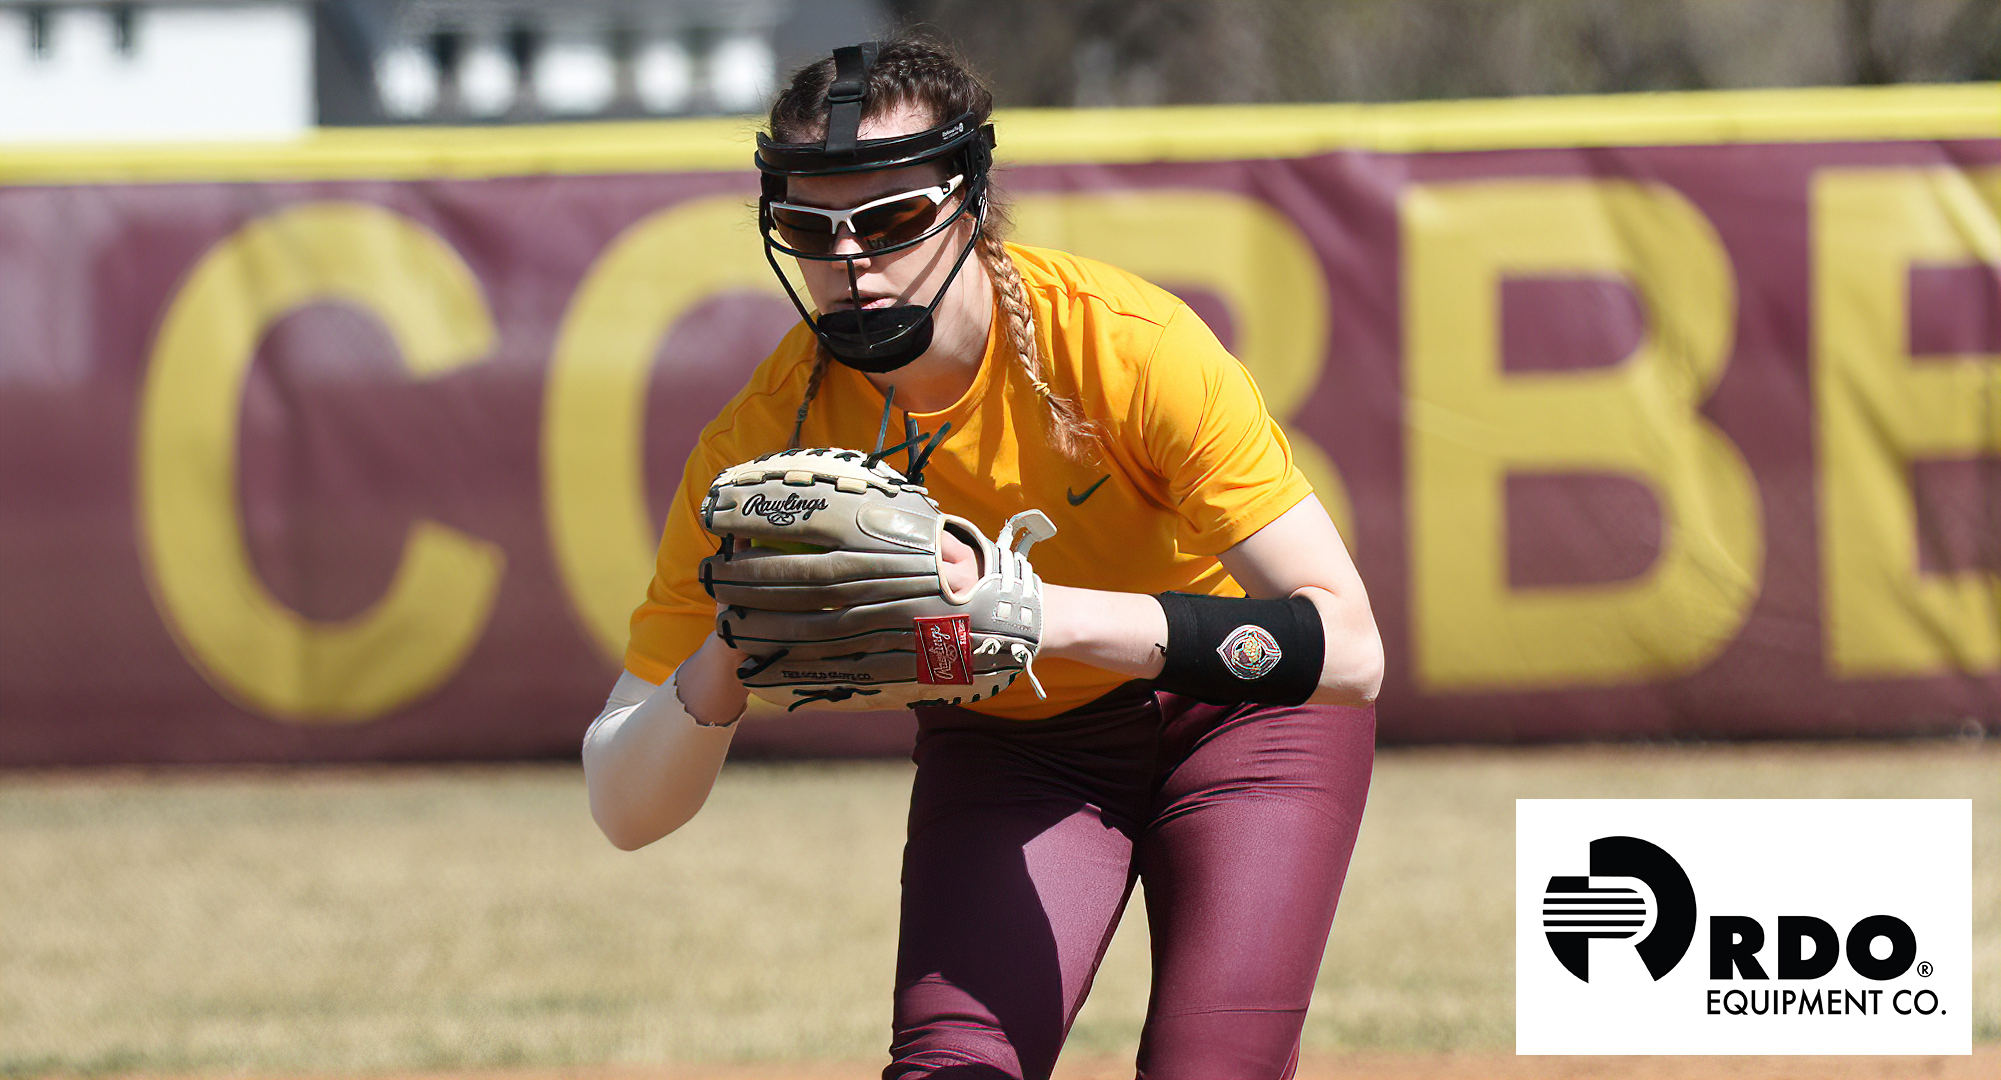 Senior Megan Gavin struck out nine in Concordia’s first game with Bethel then returned in Game 2 and fanned five to become the school’s all-time career strikeout leader.